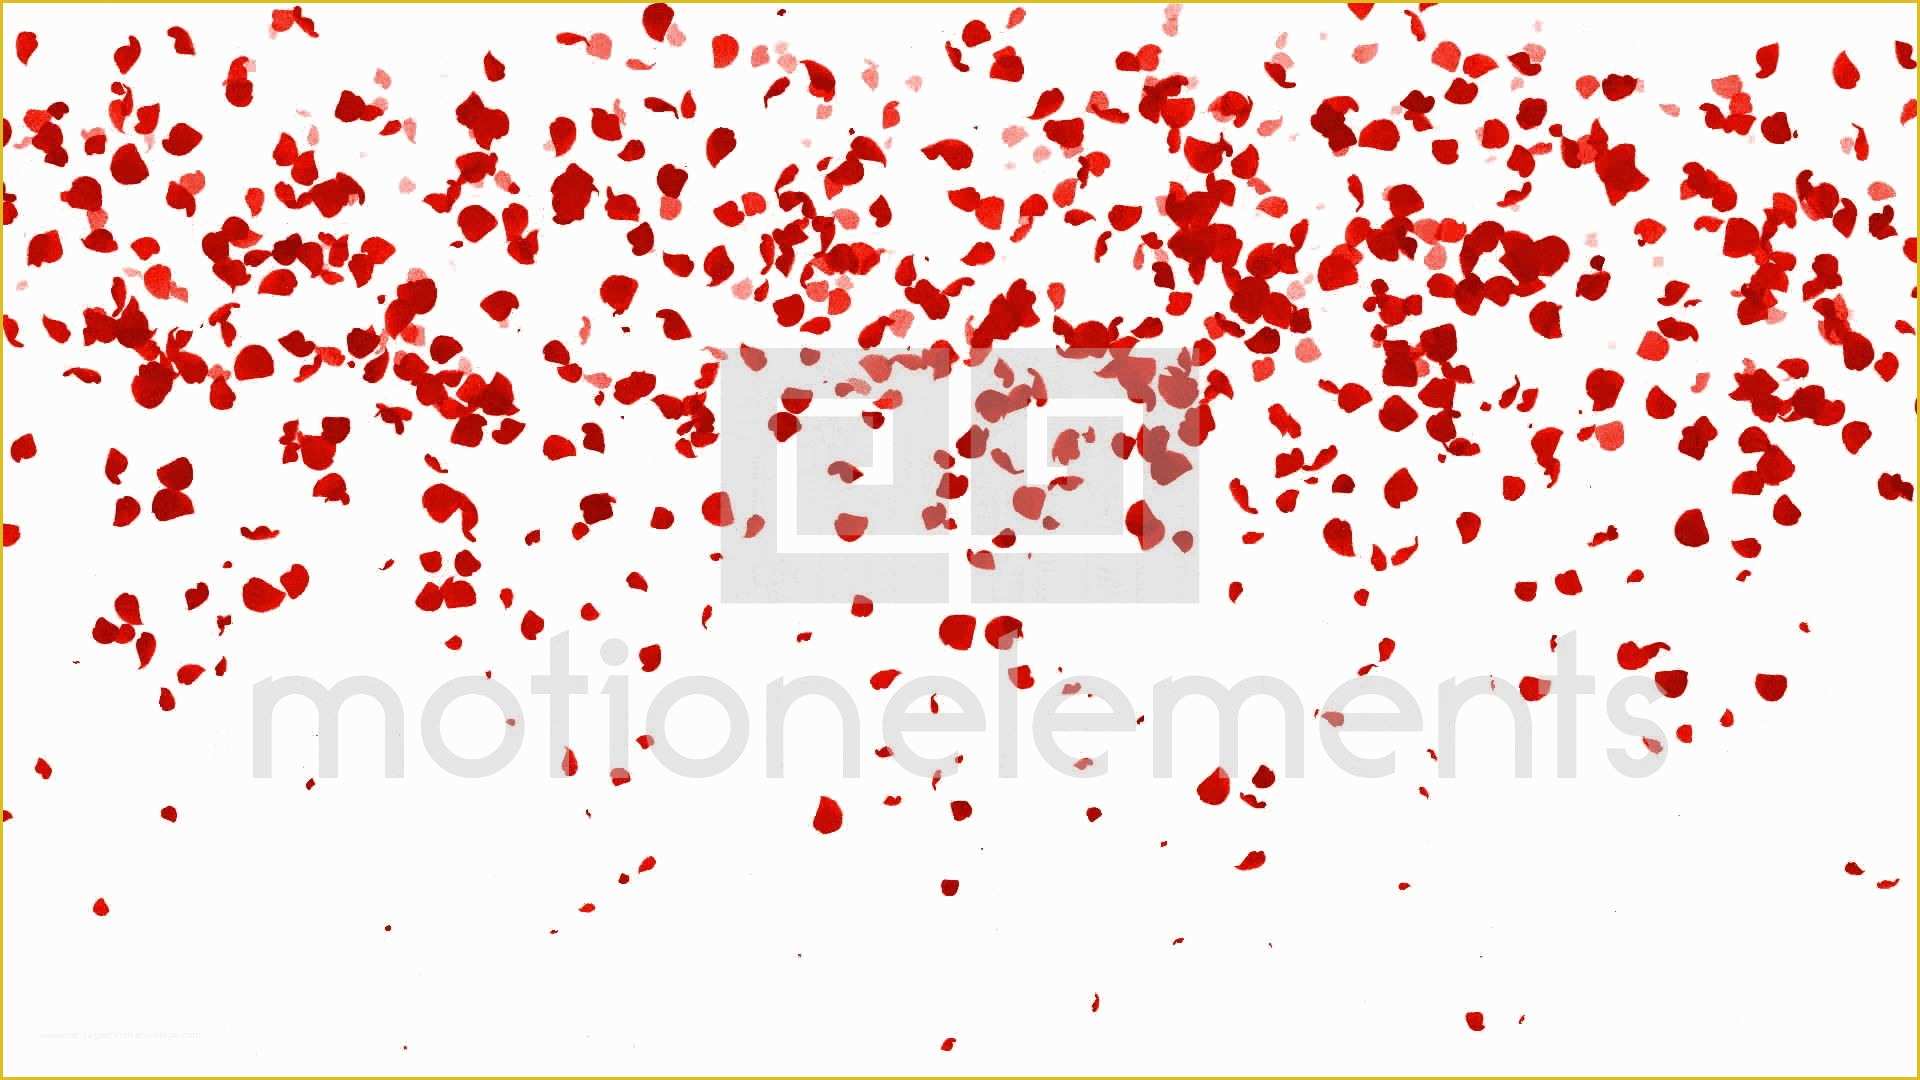 Falling Flower Petals after Effects Template Free Of Rose Petals Falling Love Pattern Romantic Rose